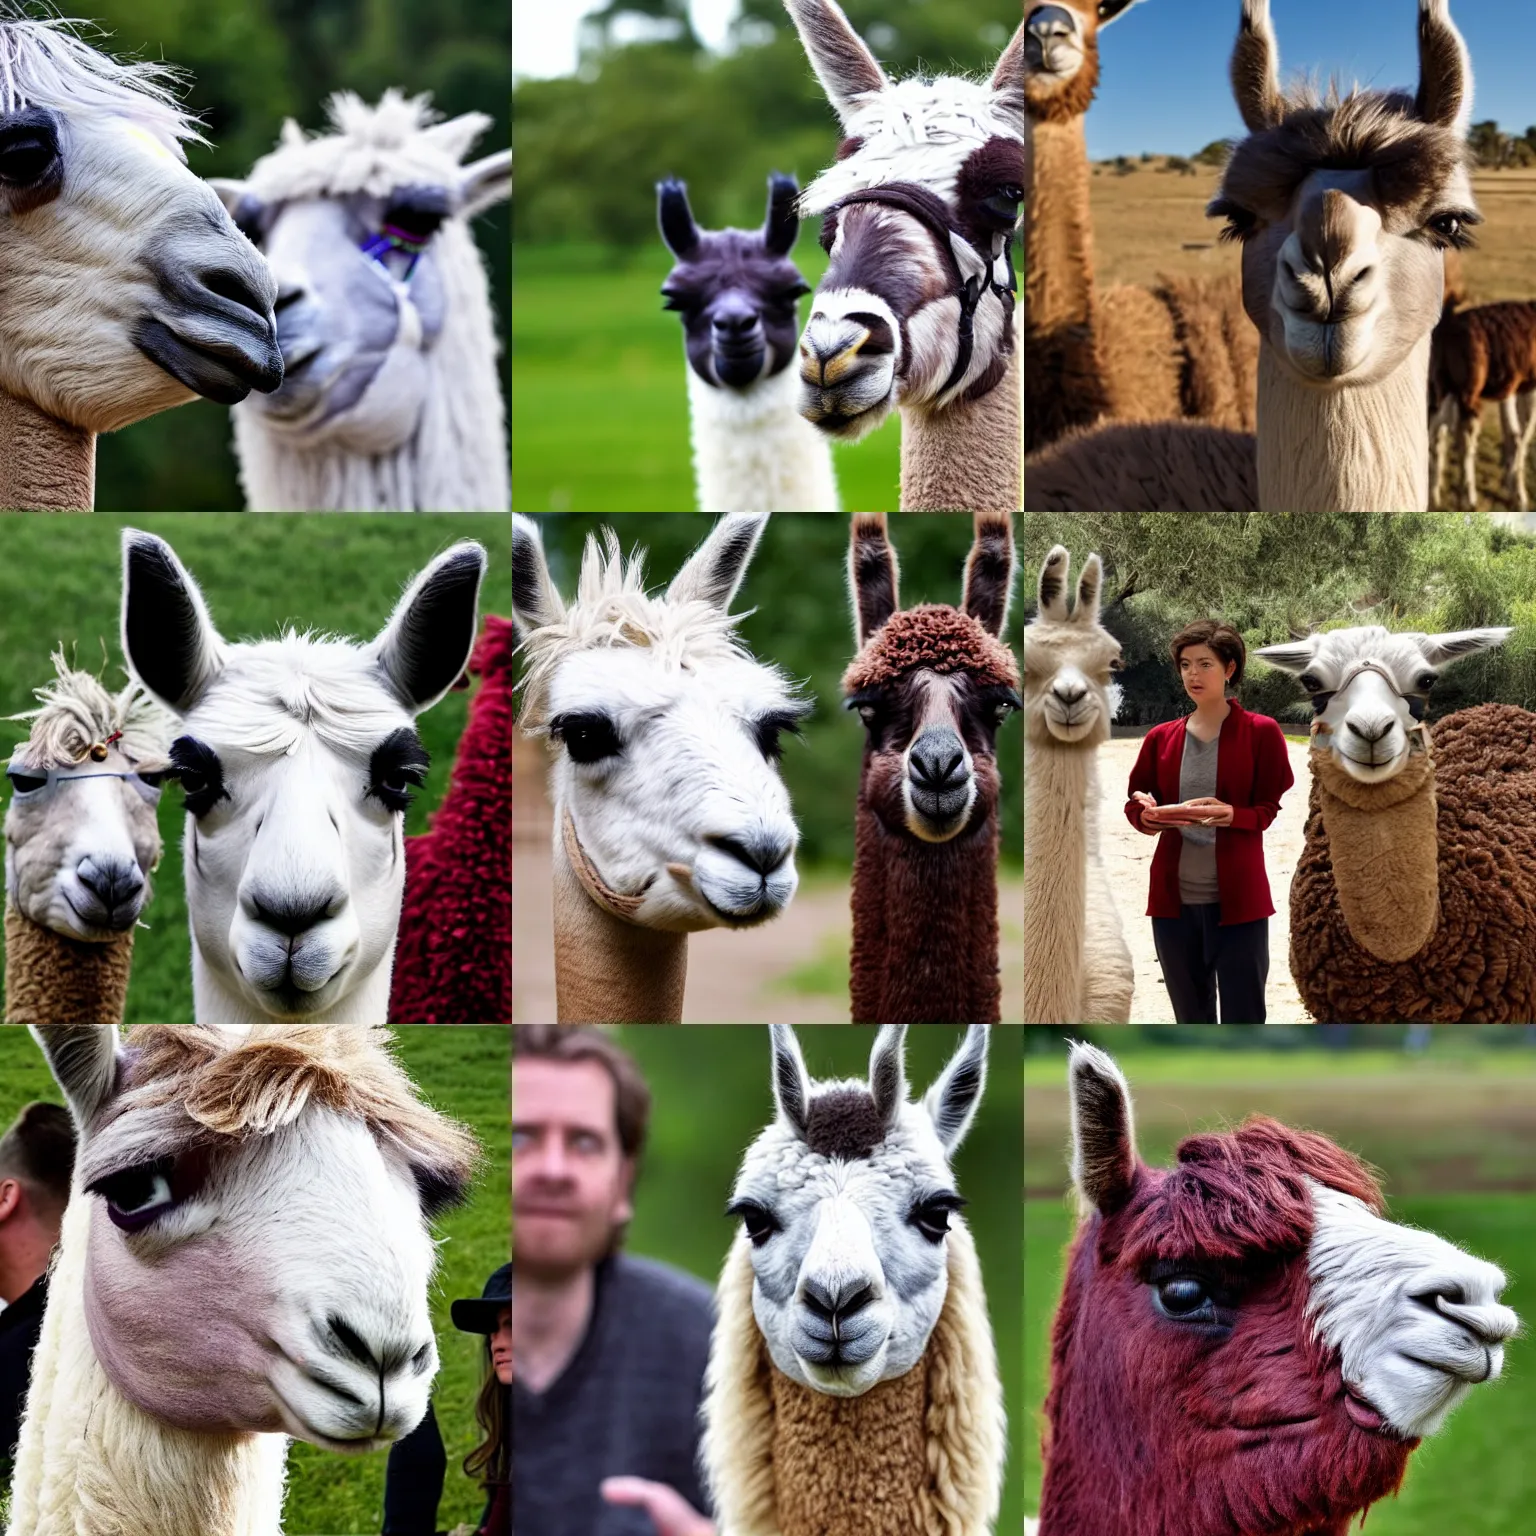 Prompt: photo hd 9 k movie still > two people next to a llama, the llama gives a knowing look into the camera